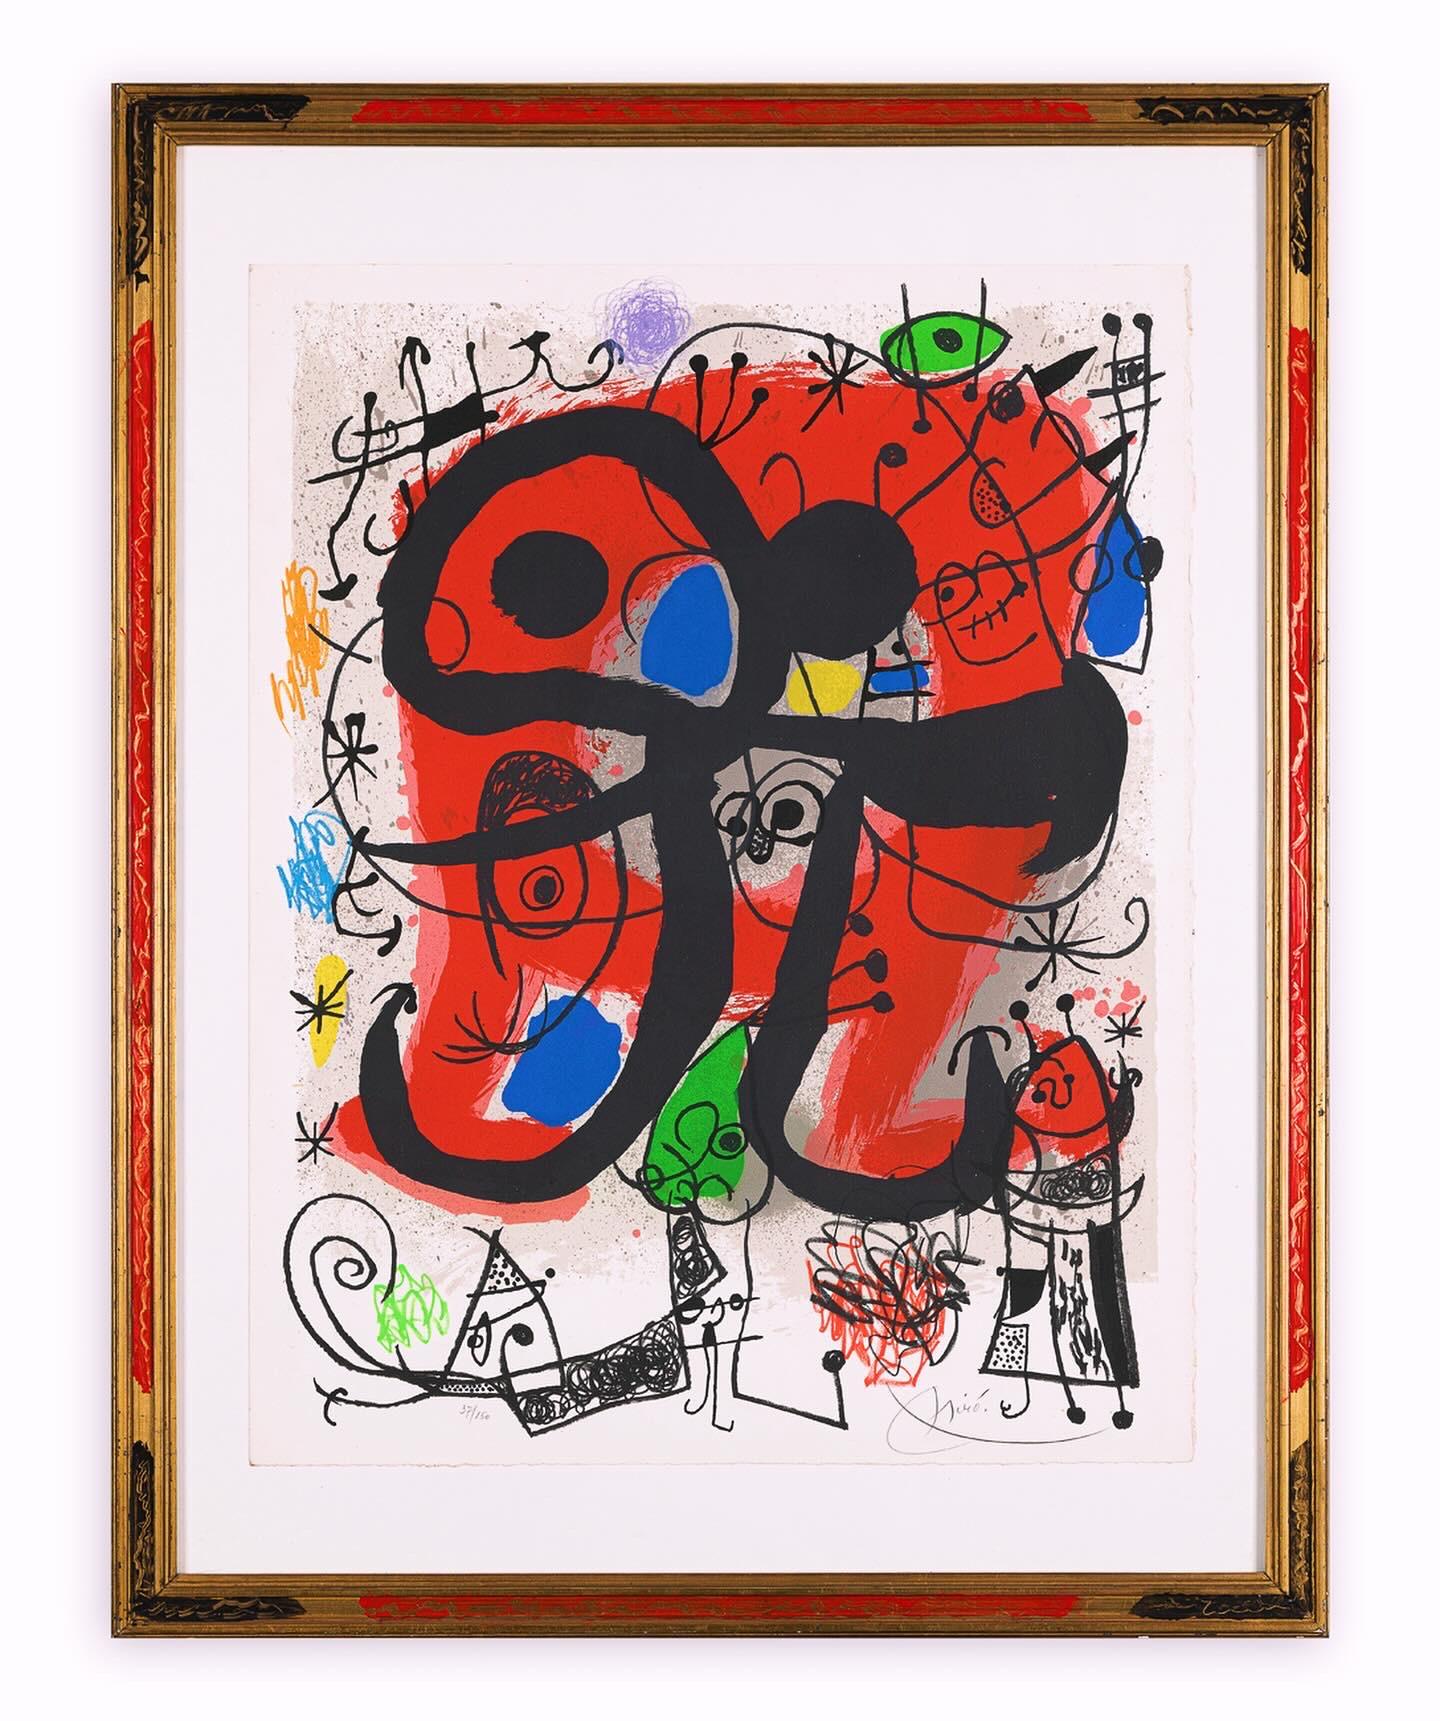 Color lithograph on Arches paper , edited in 1971
Limited edition of 150 copies
Hand signed by Joan Miró in pencil in the lower right margin ,
and numbered 37/150 in lower left corner
paper size: : 66 x 52 cm
excellent conditions with strong deep